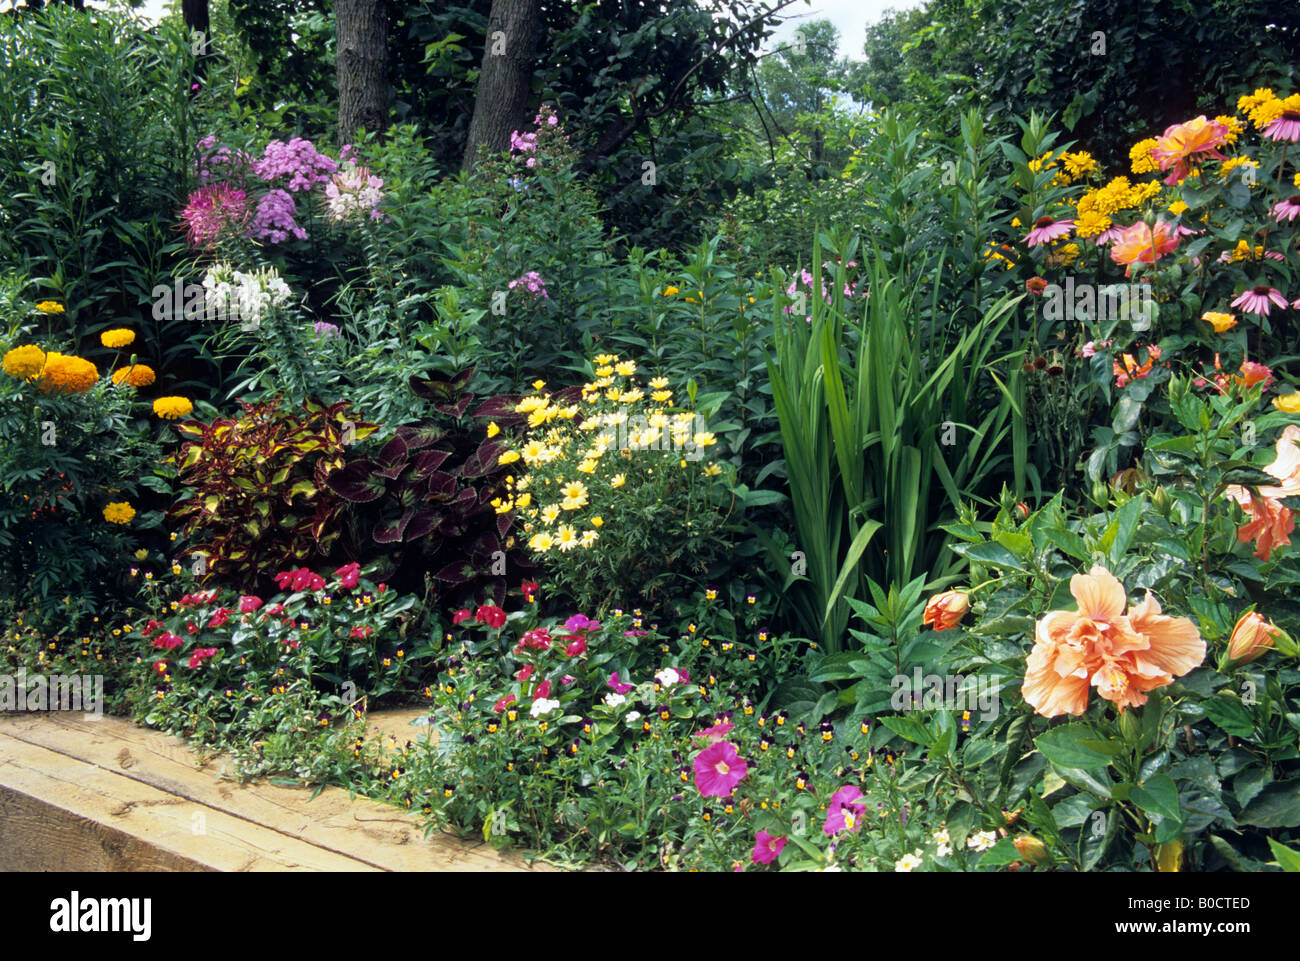 COLORFUL SUN GARDEN OF PERENNIALS AND ANNUALS IN RURAL MINNESOTA. SUMMER. Stock Photo